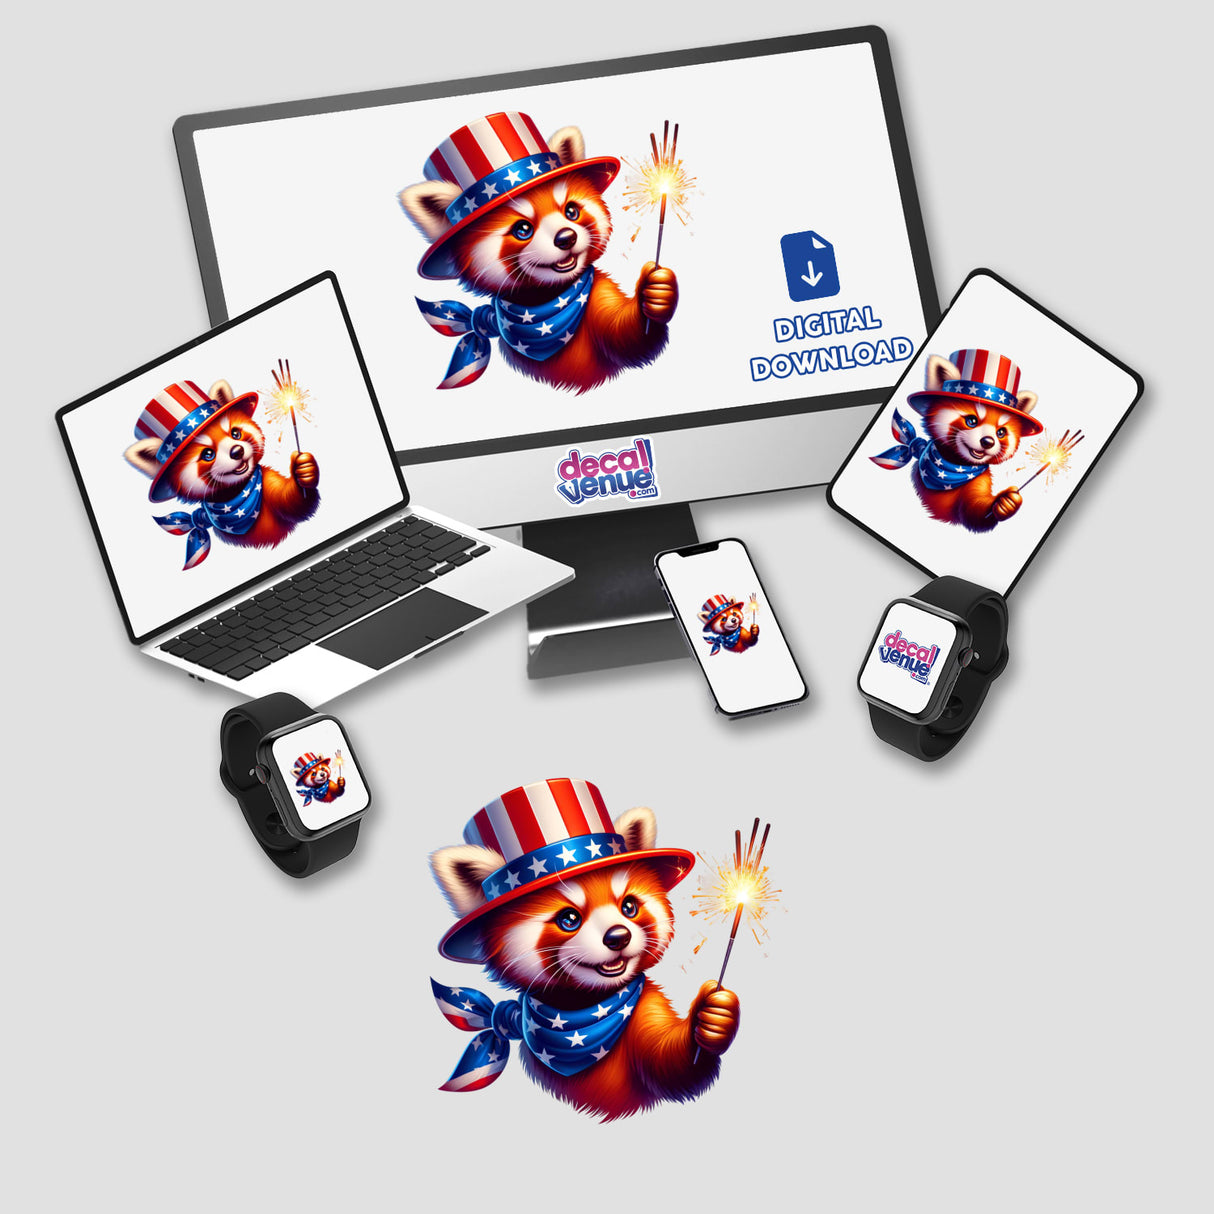 Red Panda Holding Sparkler 4th of July